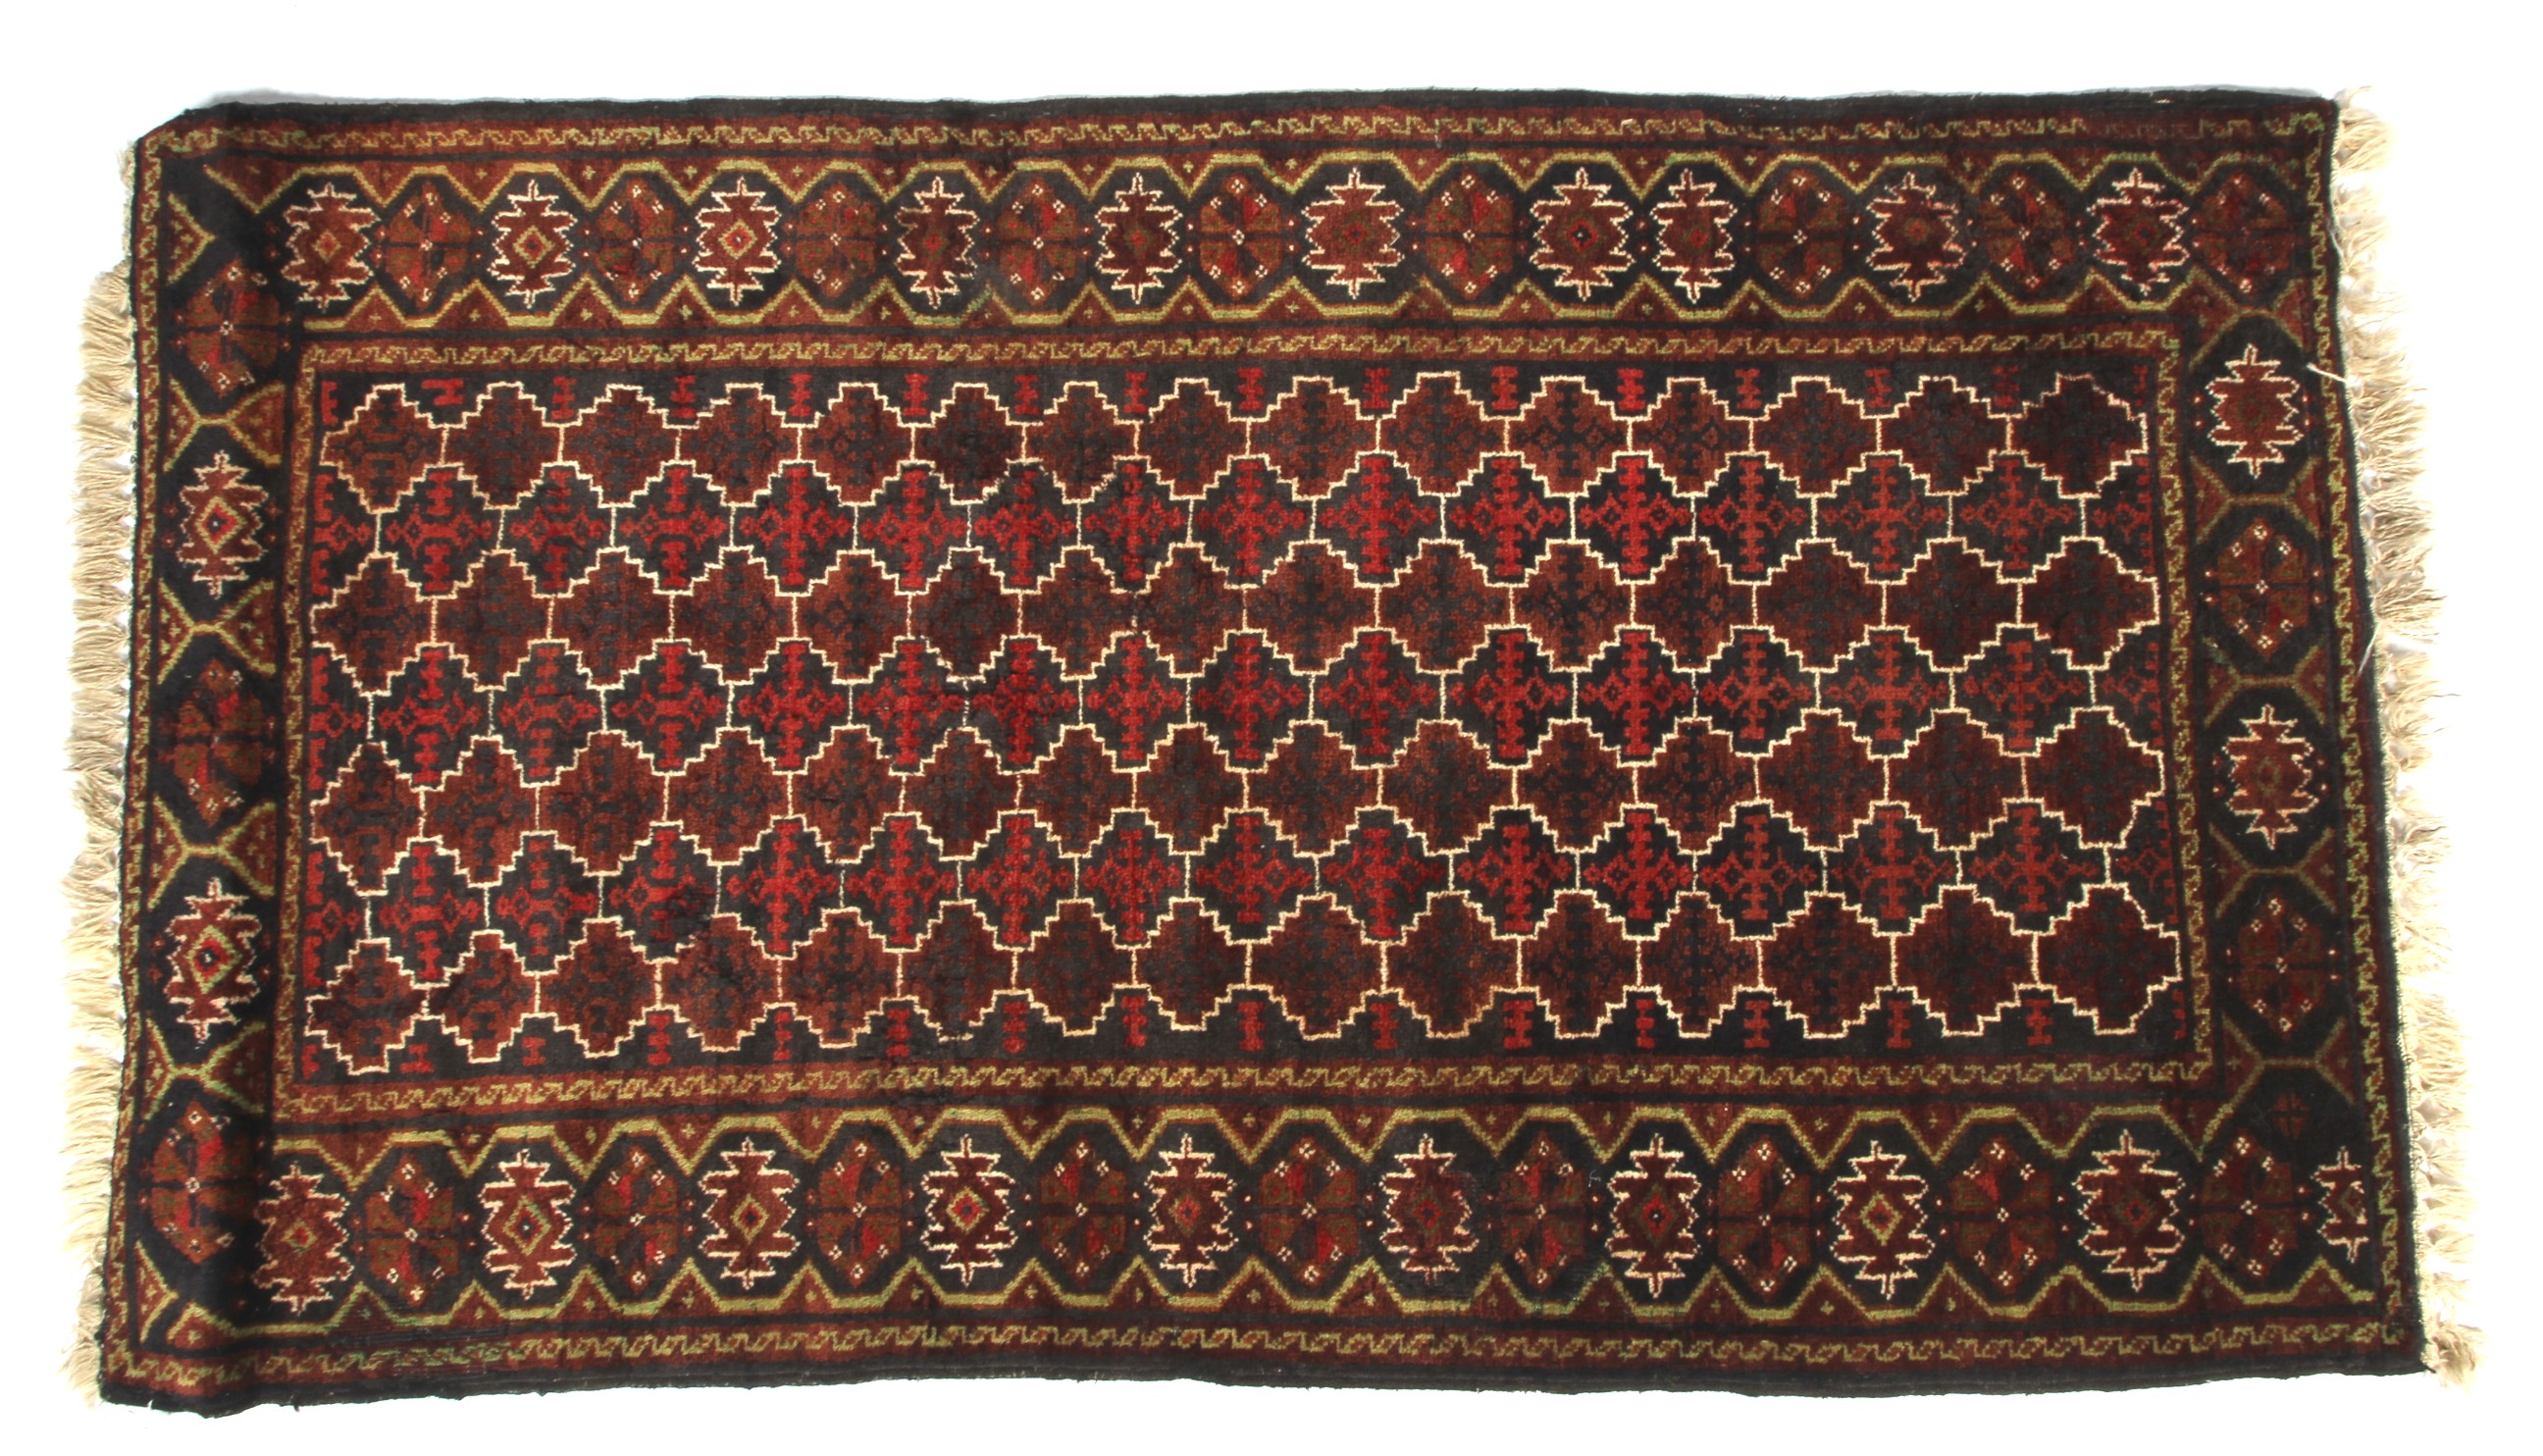 A 20th century wool rug woven with geome